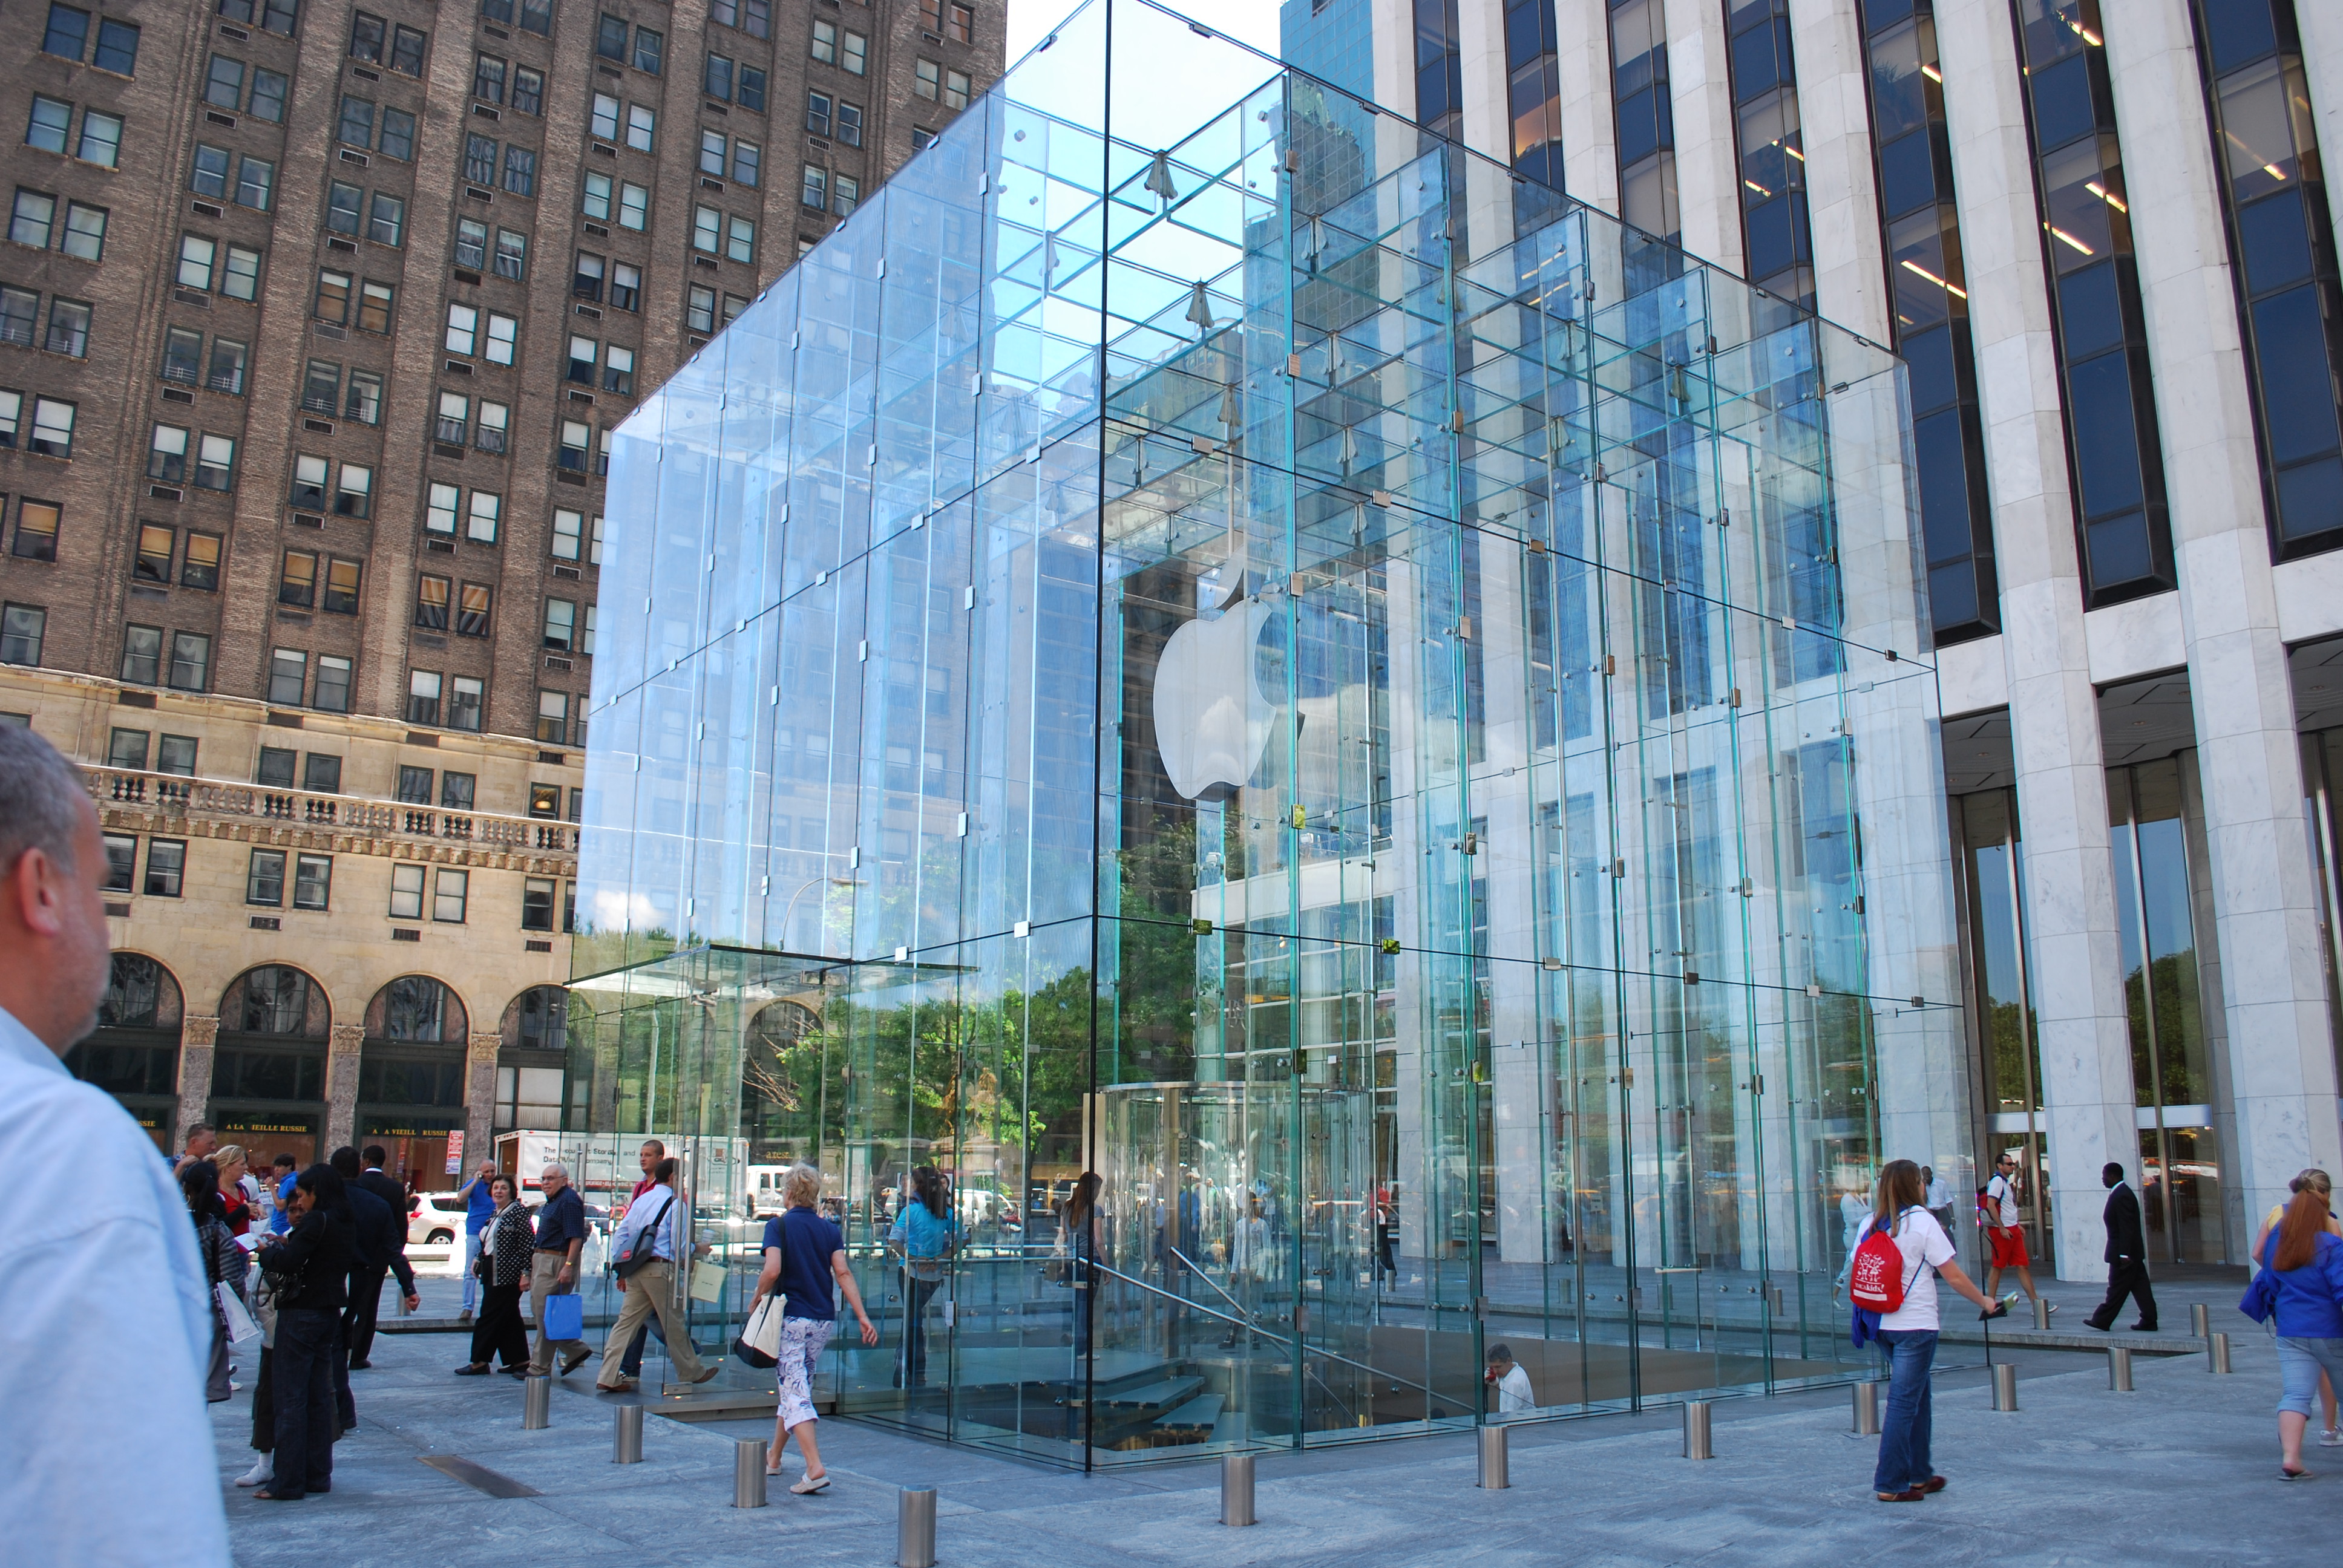 Apple Stores to help iPhone 5 Sales?